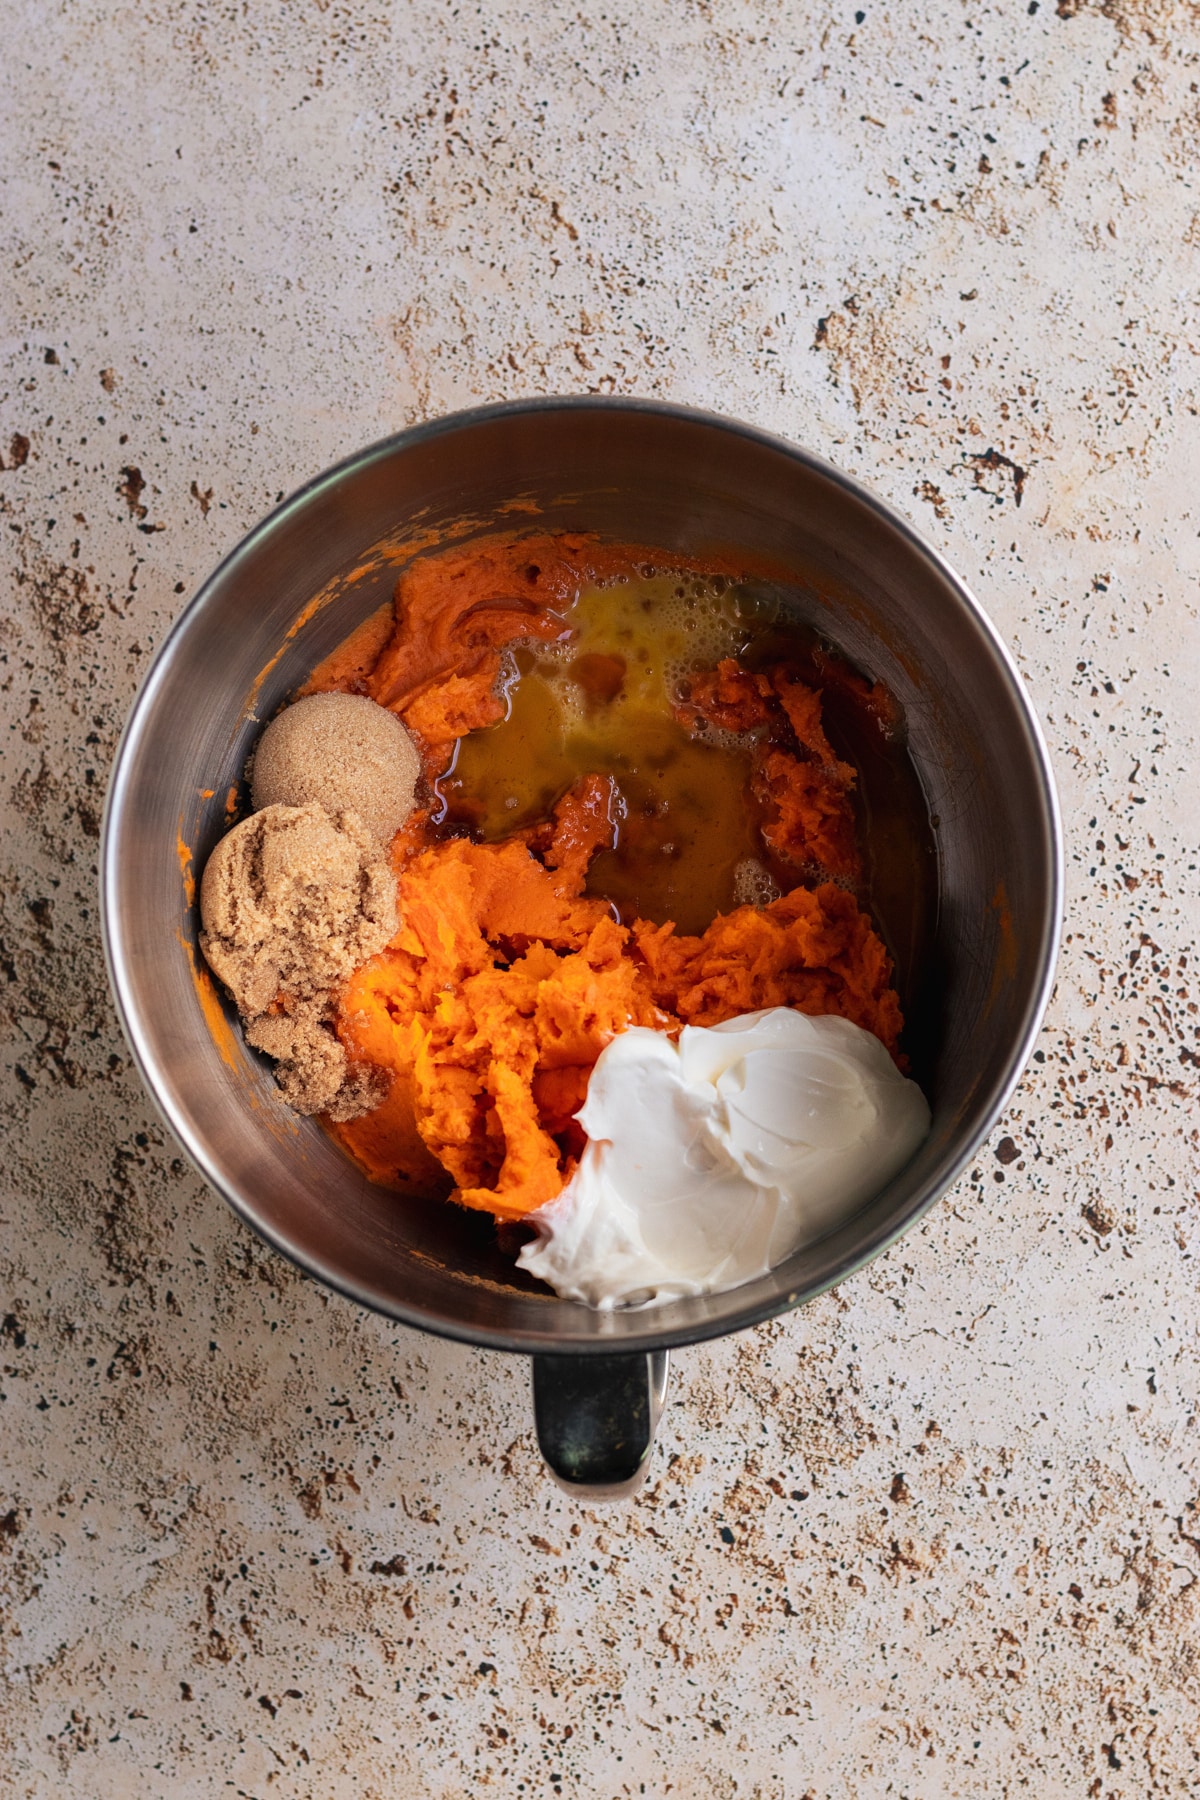 mashed sweet potatoes in a stainless steel bowl.